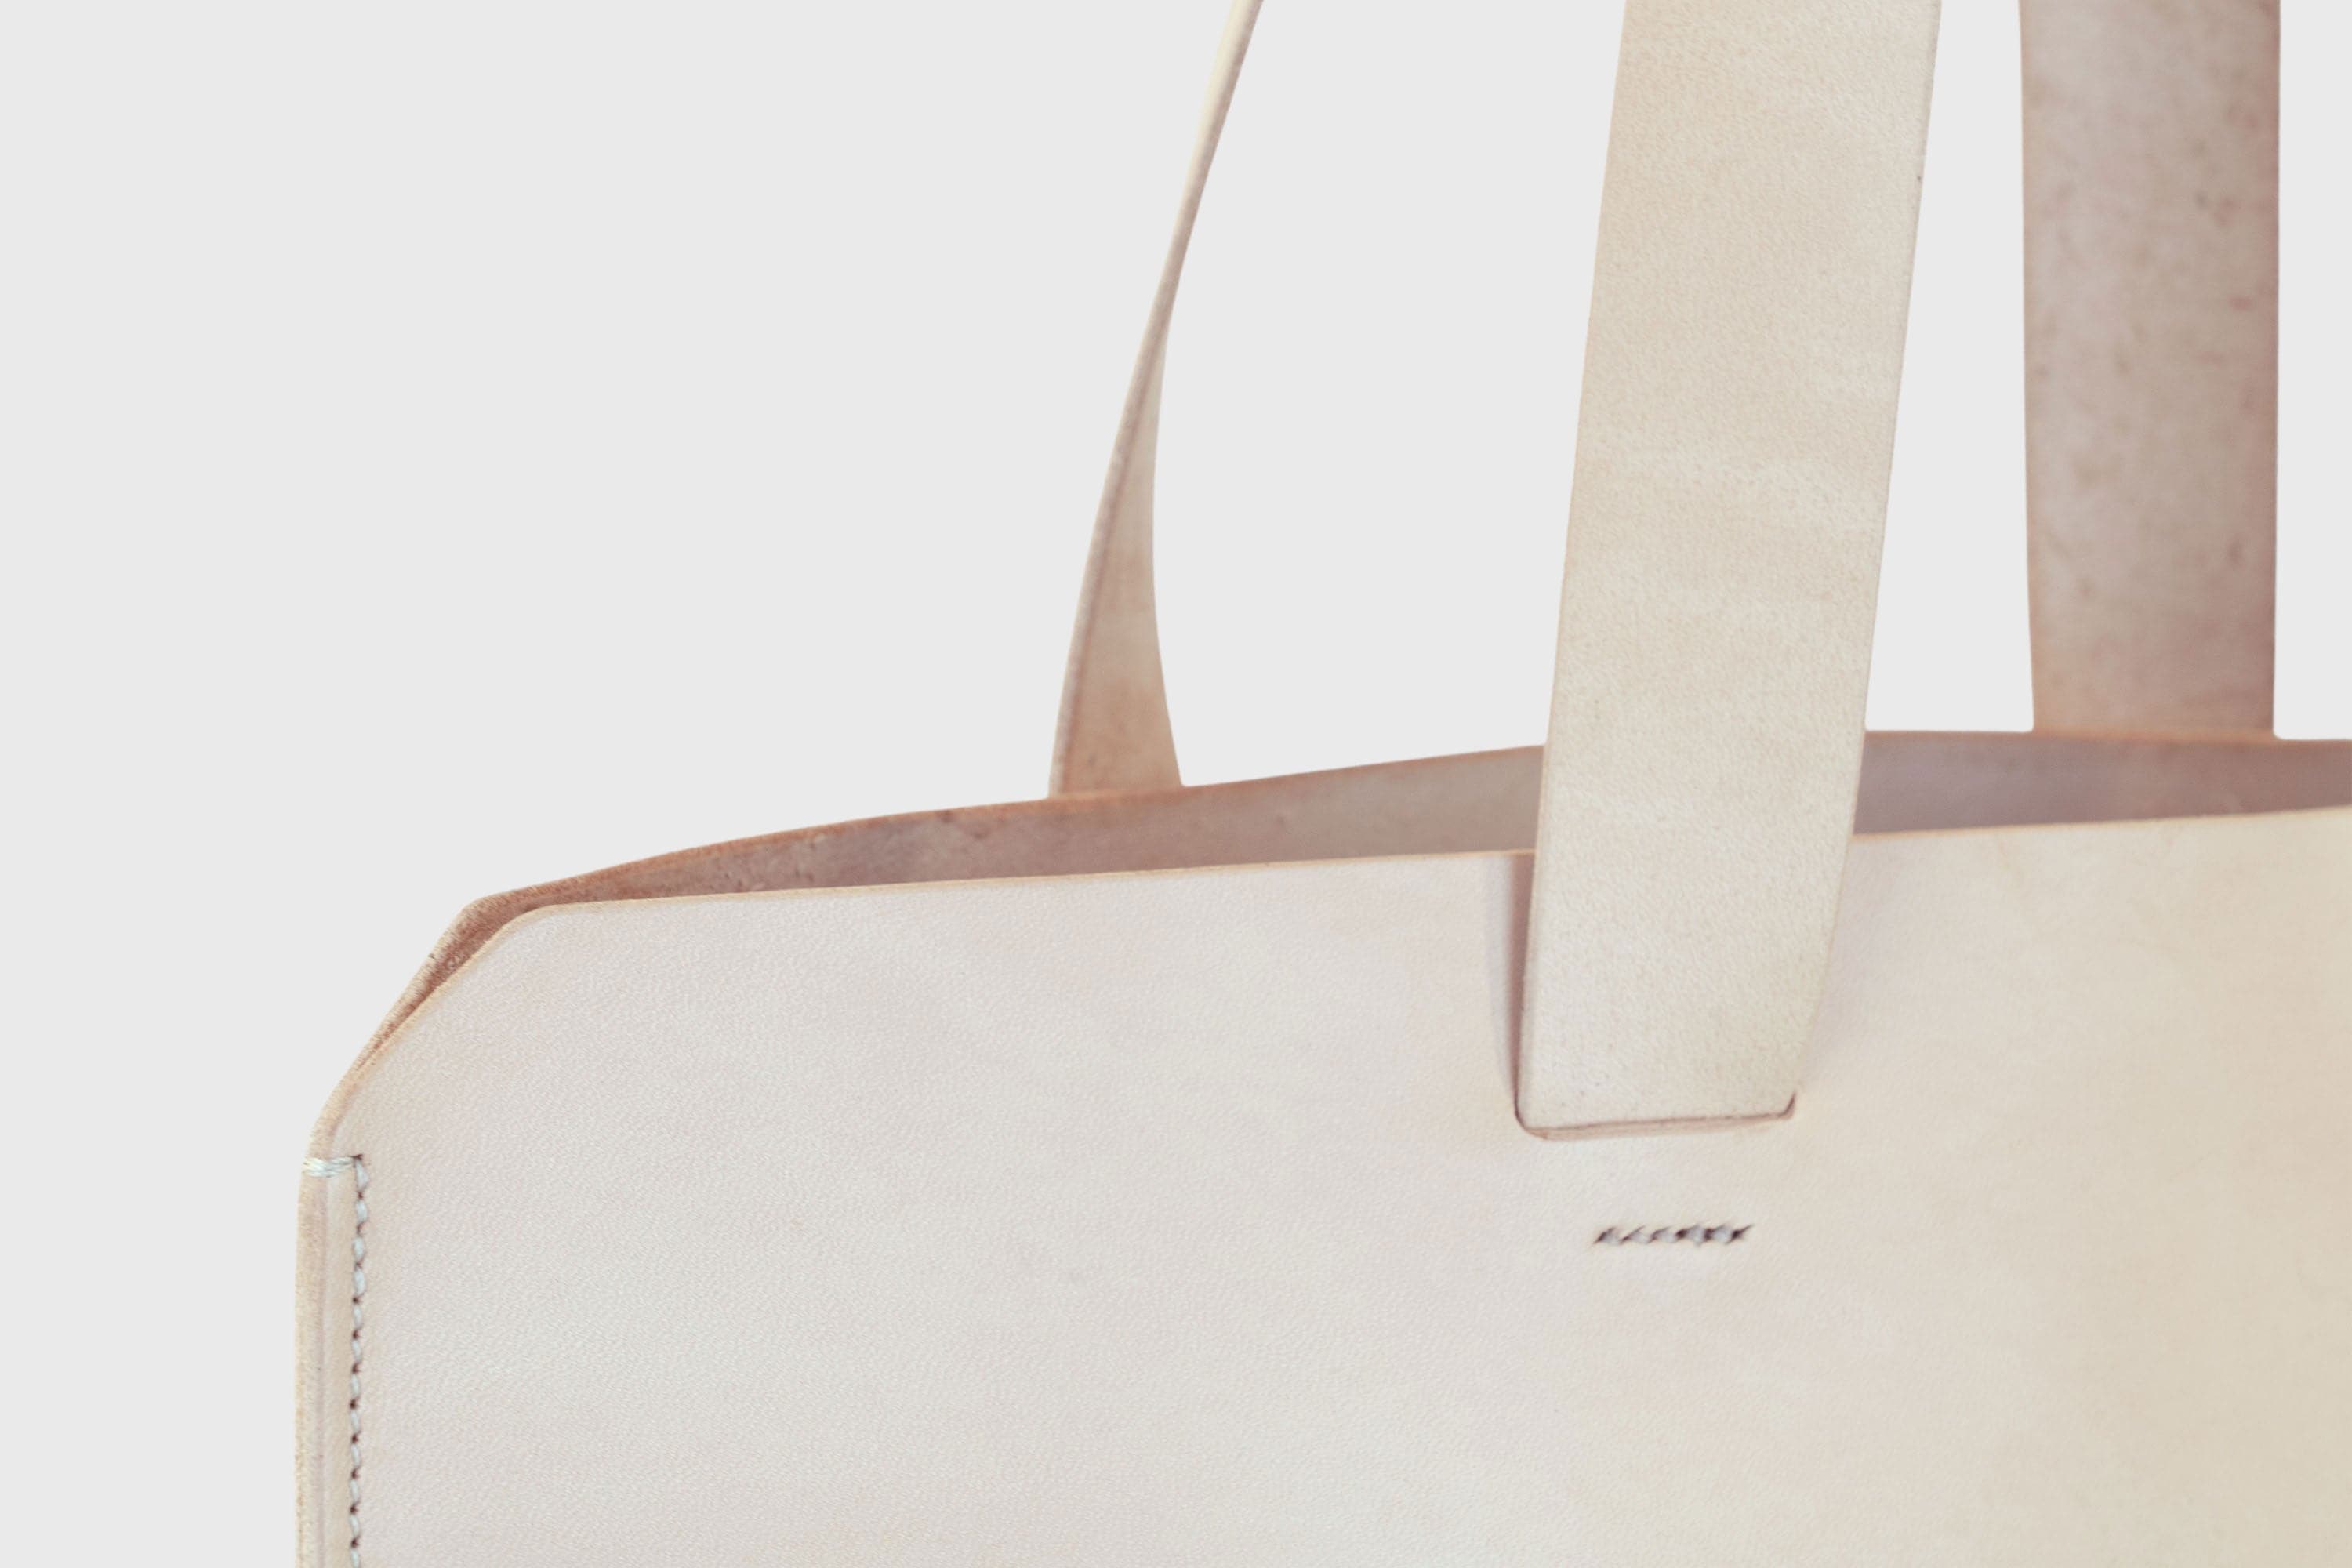 Stitching Detail of Tote Bag Vegetable Tanned Leather Nude Minimal Design By Manuel Dreesmann Atelier Madre Barcelona Spain